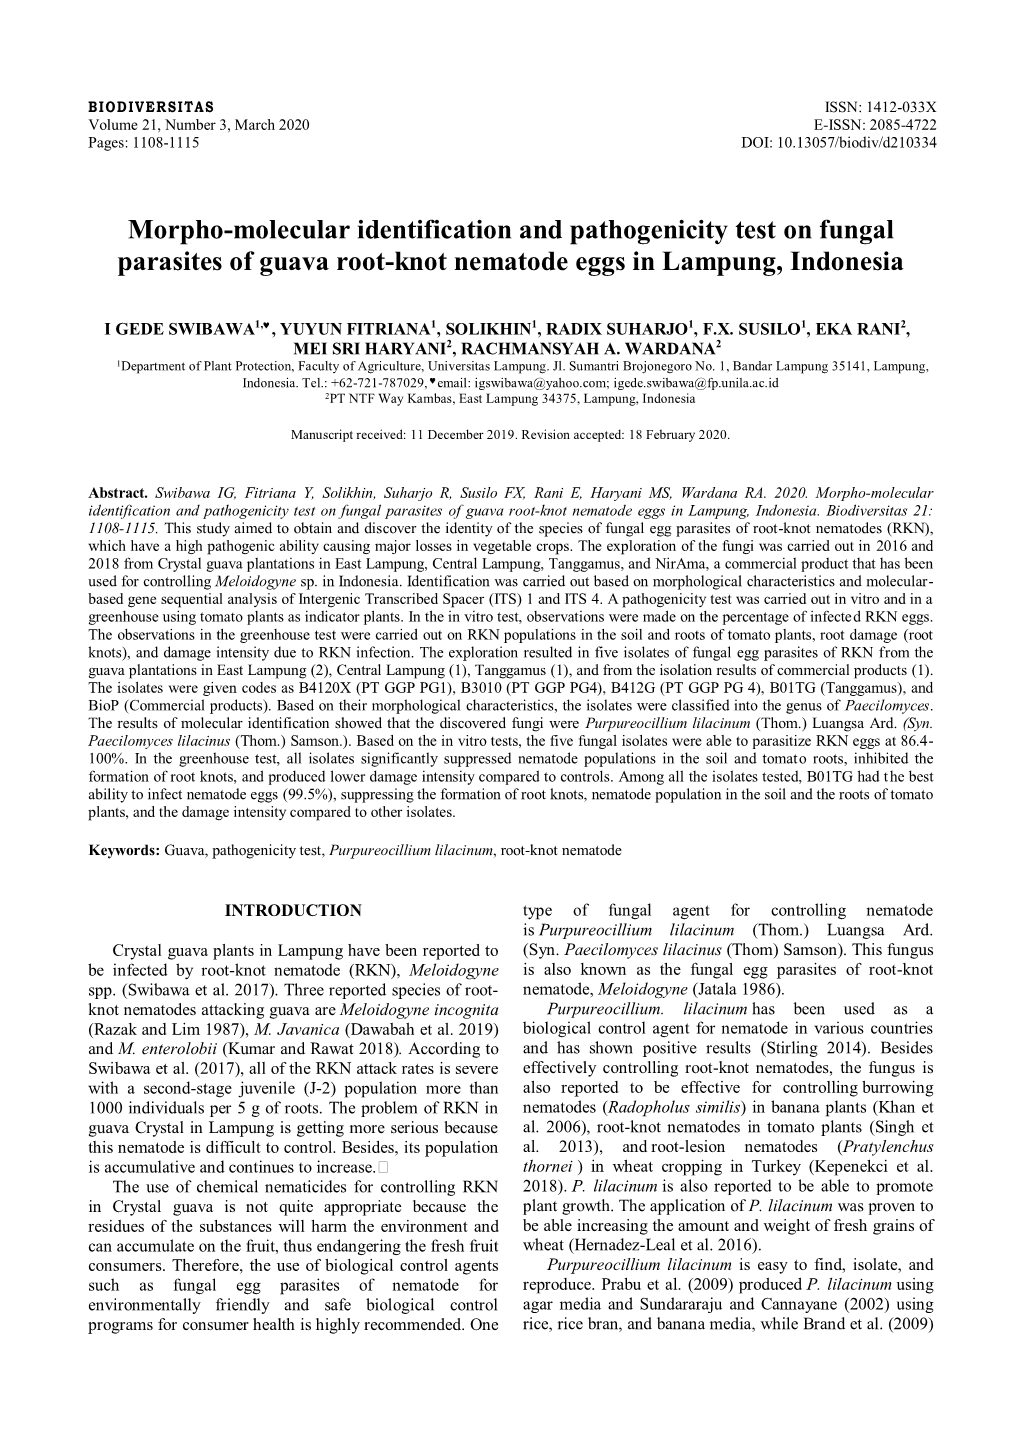 Morpho-Molecular Identification and Pathogenicity Test on Fungal Parasites of Guava Root-Knot Nematode Eggs in Lampung, Indonesia